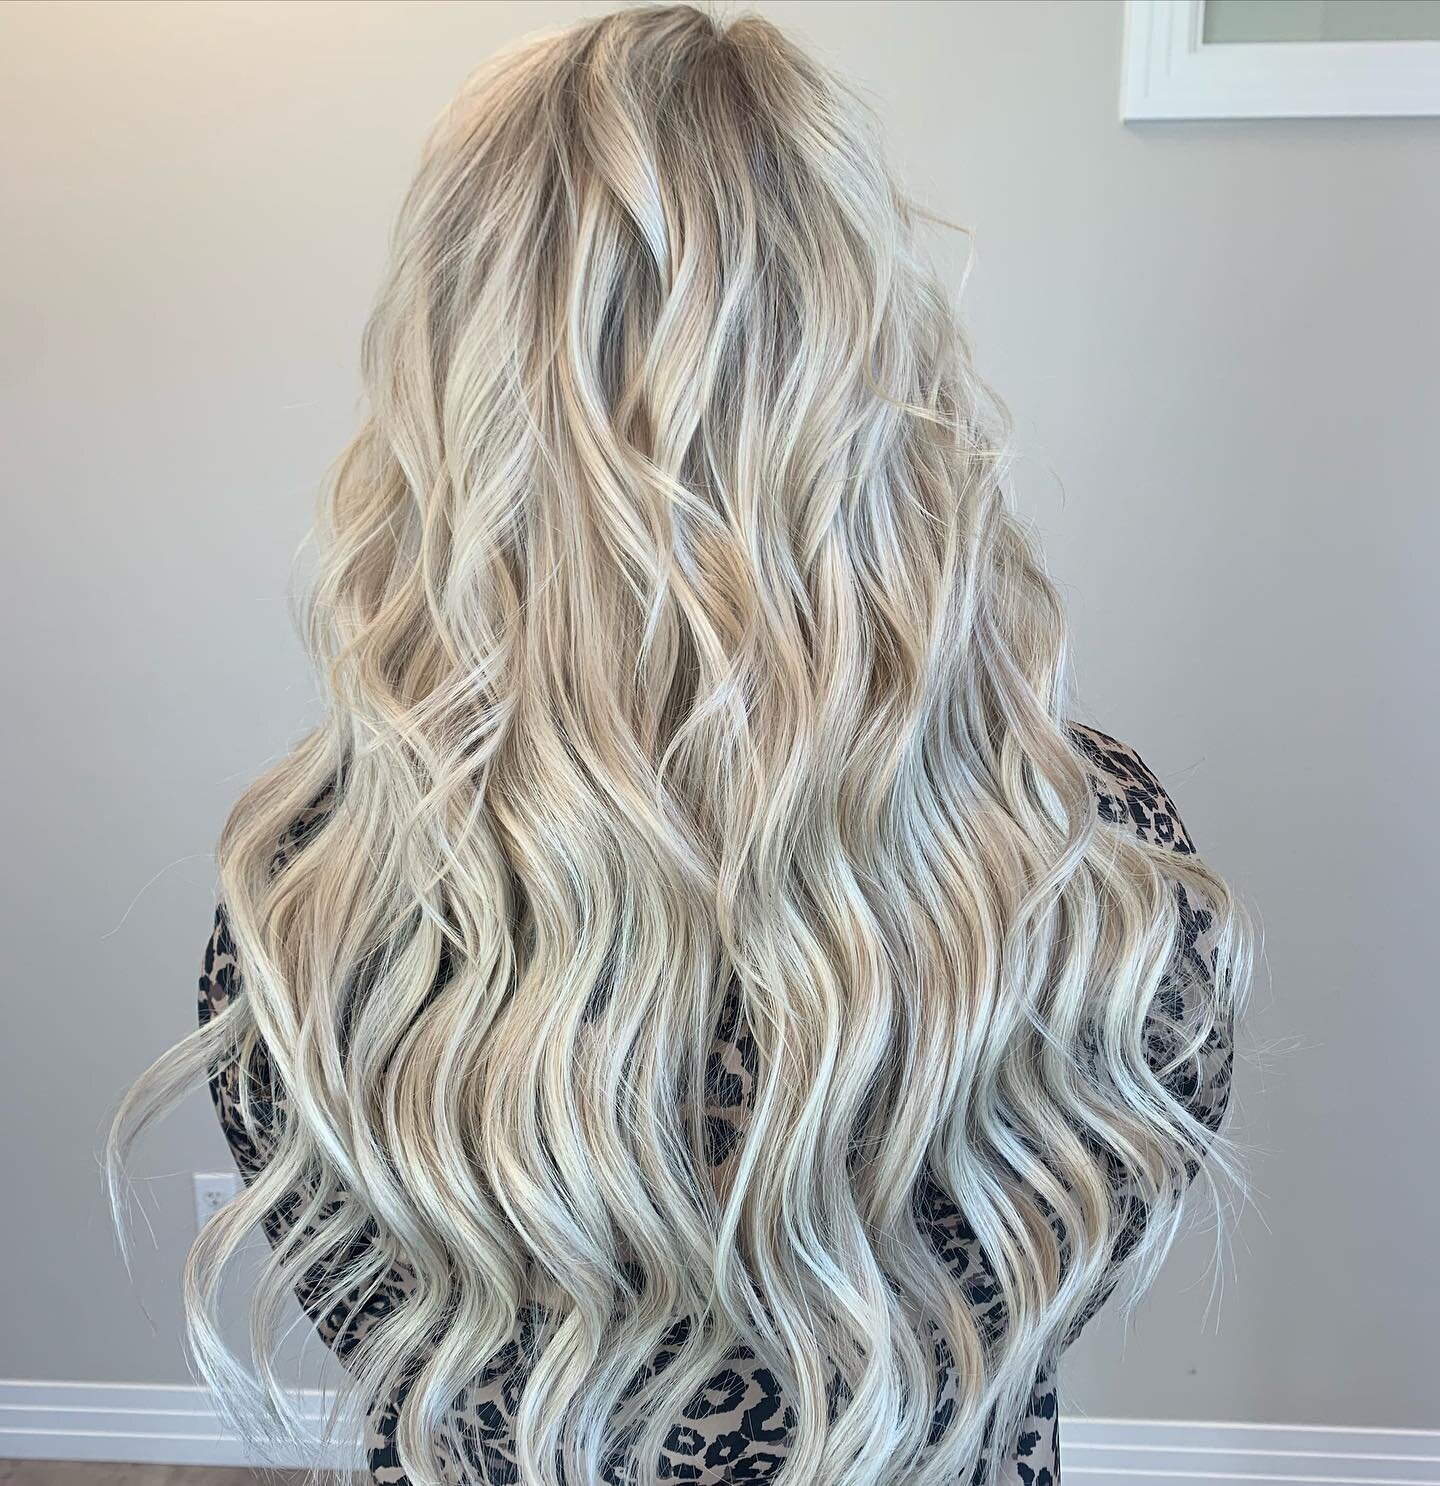 I love a good highlighted light blonde with flawless extensions to match.
.
.
If you have ever thought of trying extensions I recommend do. Do at least once in your life! It&rsquo;s kind of game changing 🫠
.
.
I offer two methods. This one is @invis